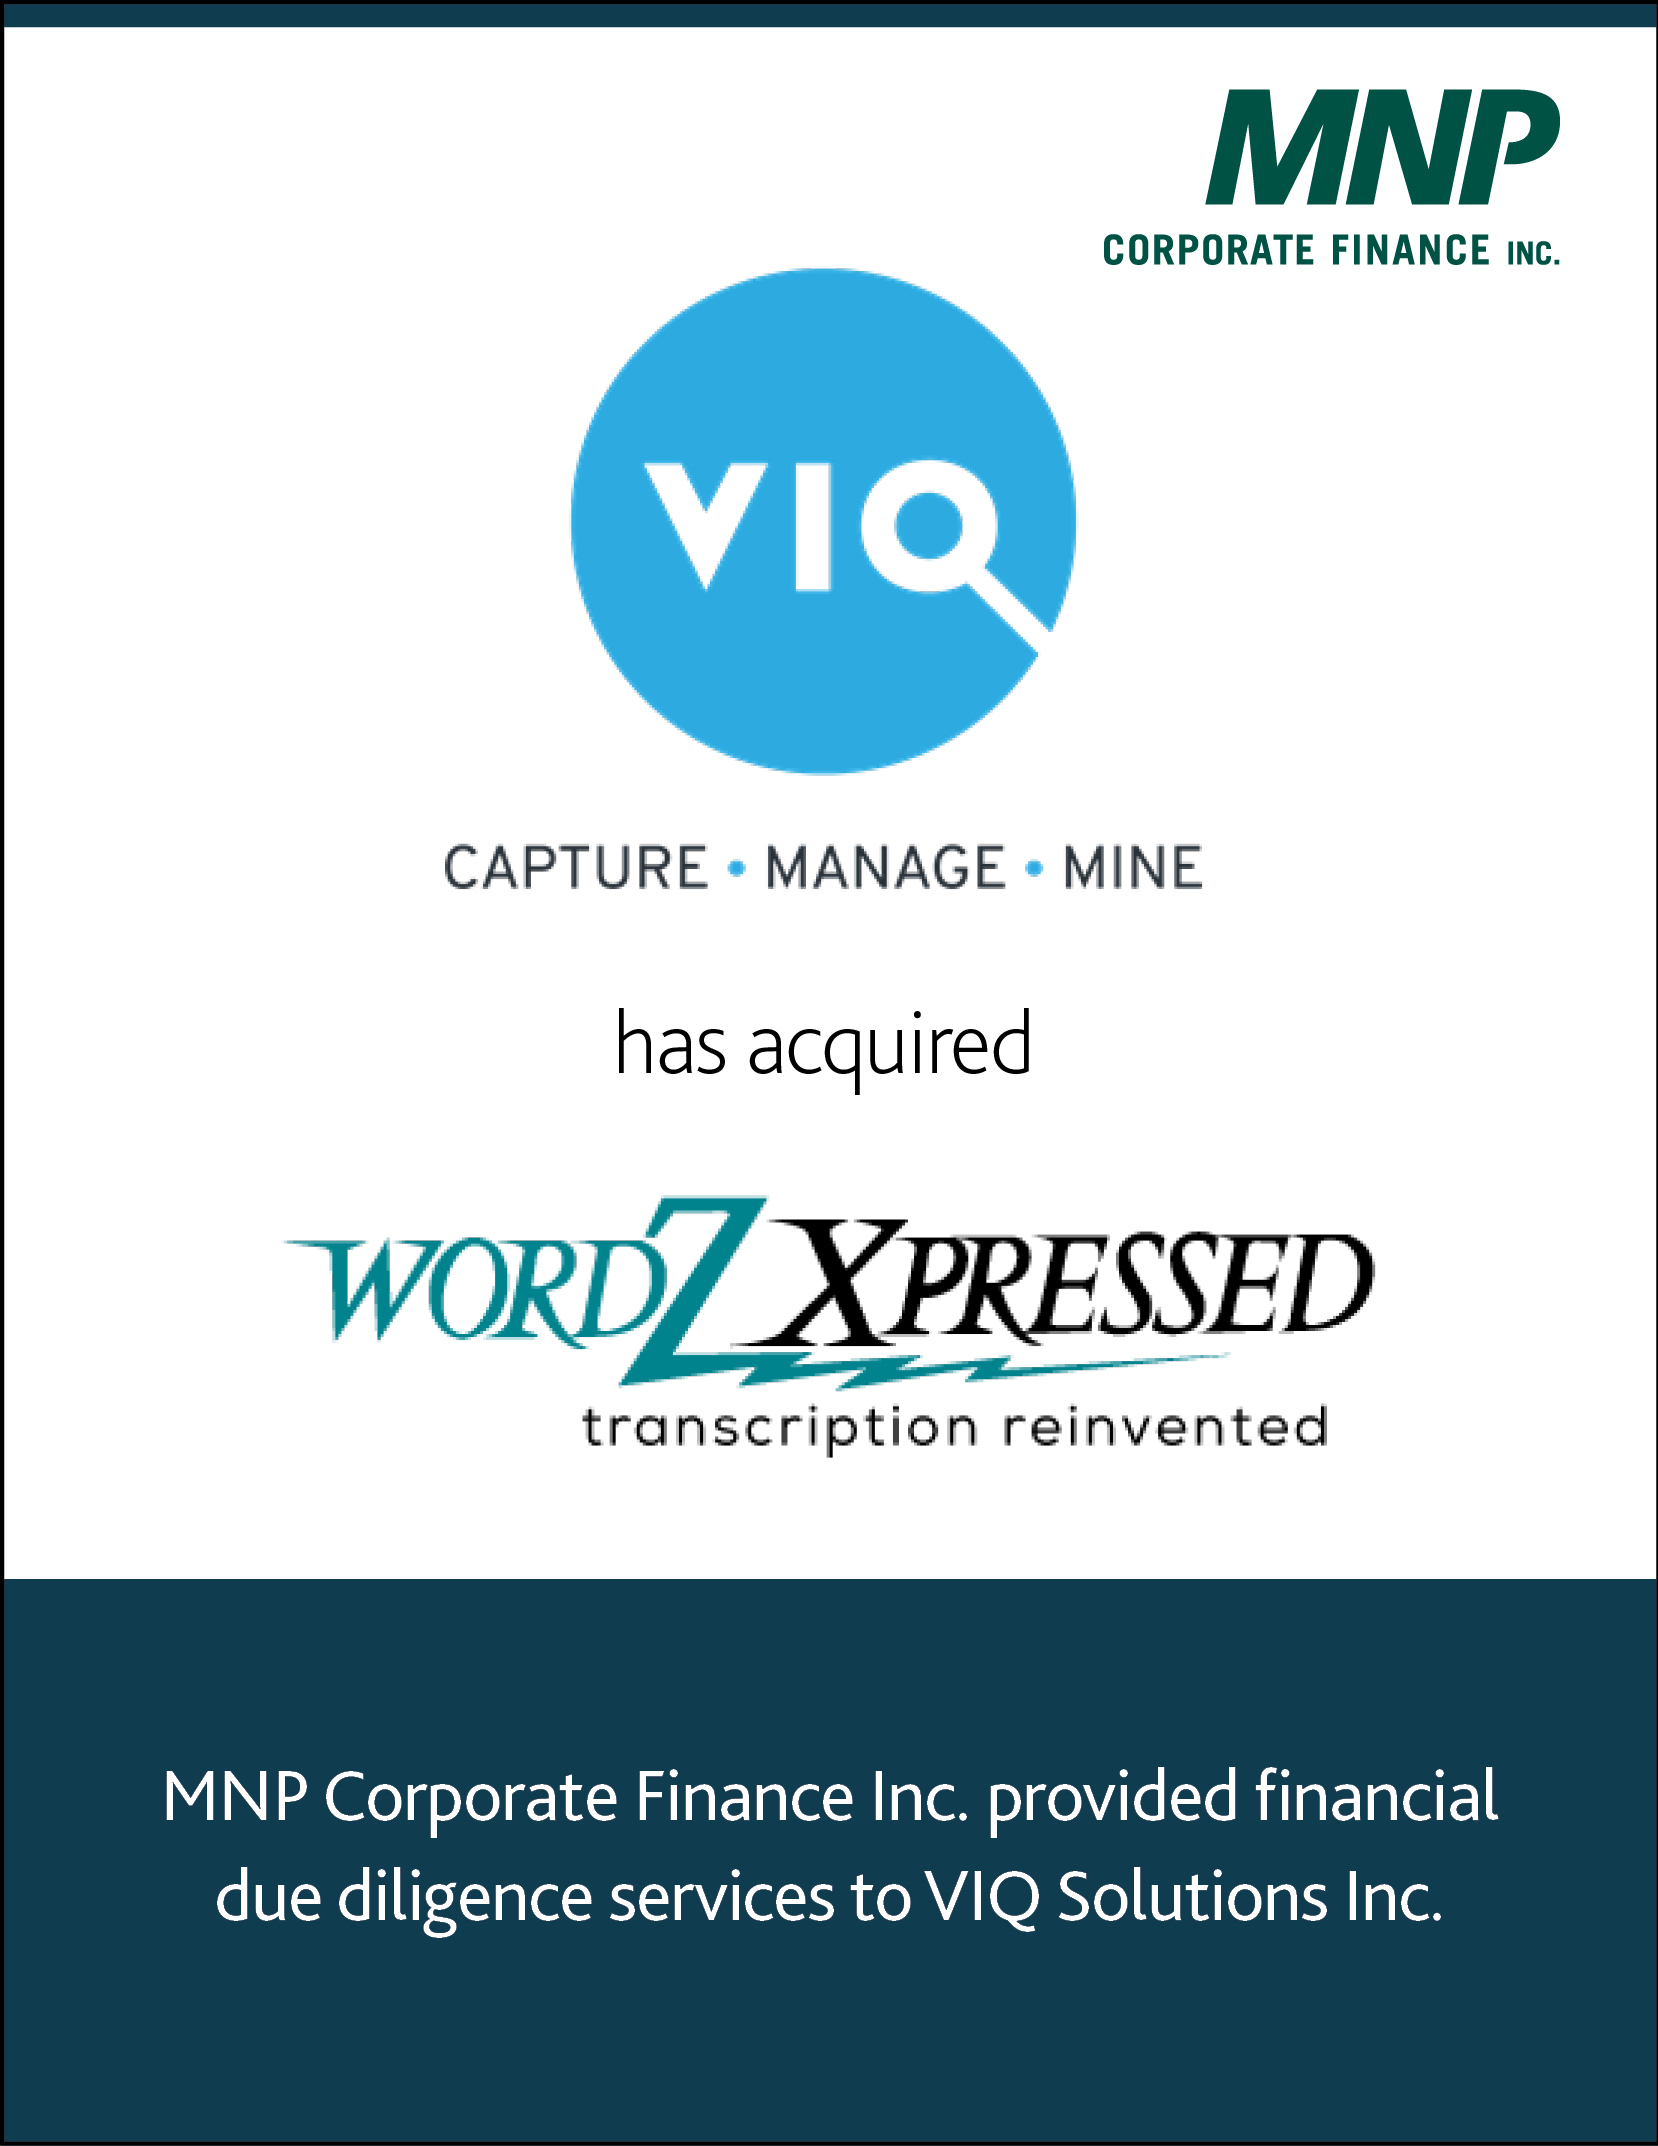 VIQ Solutions Inc. has acquired wordZXpressed, Inc.